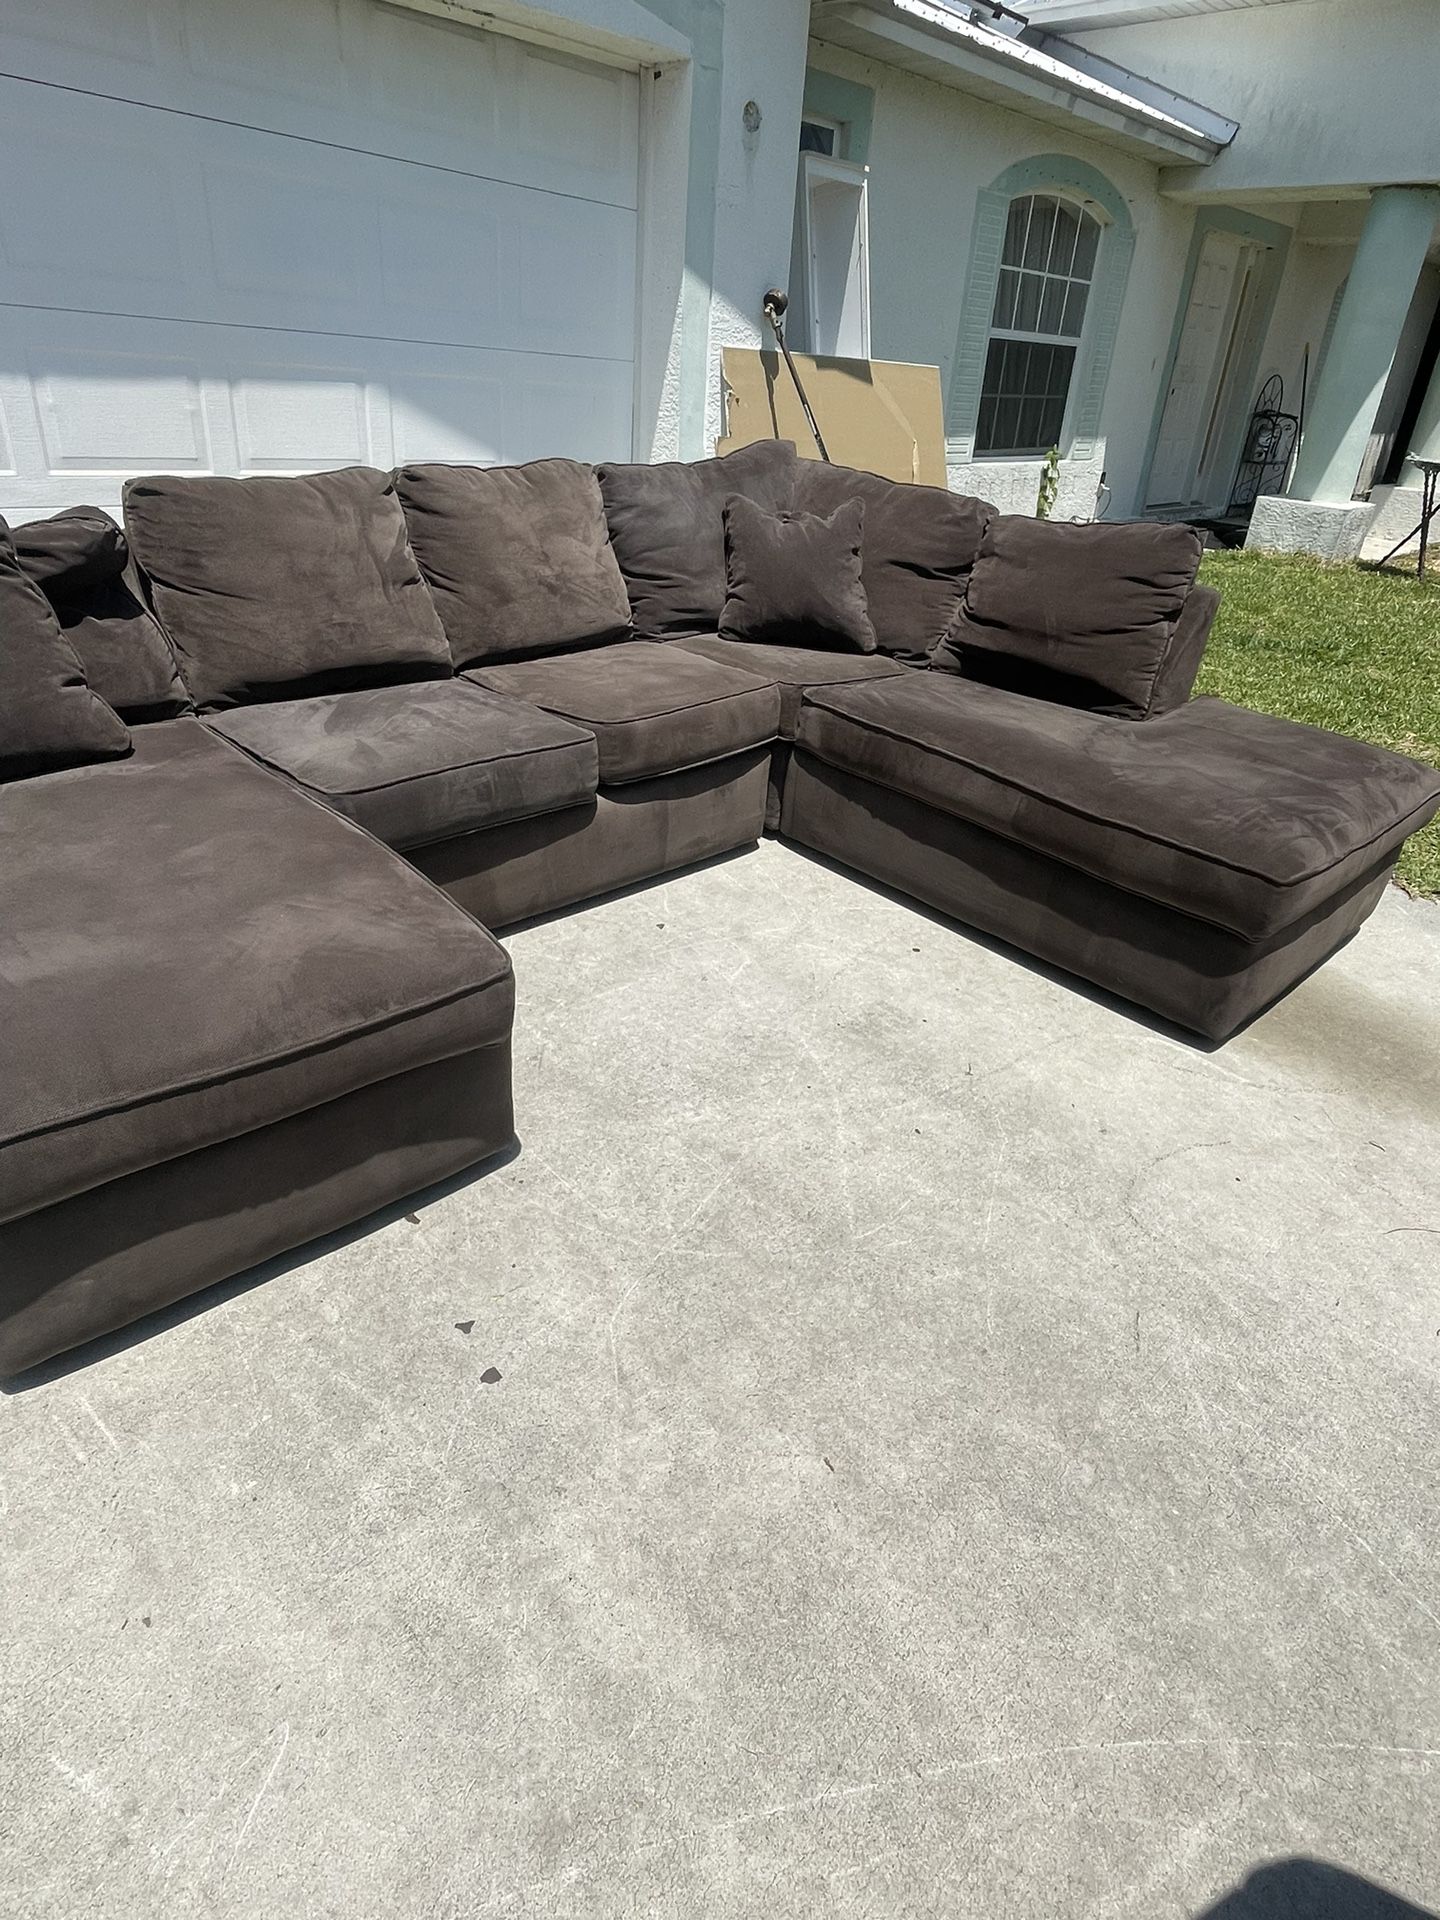 FREE DELIVERY- Kevin Charles Sectional